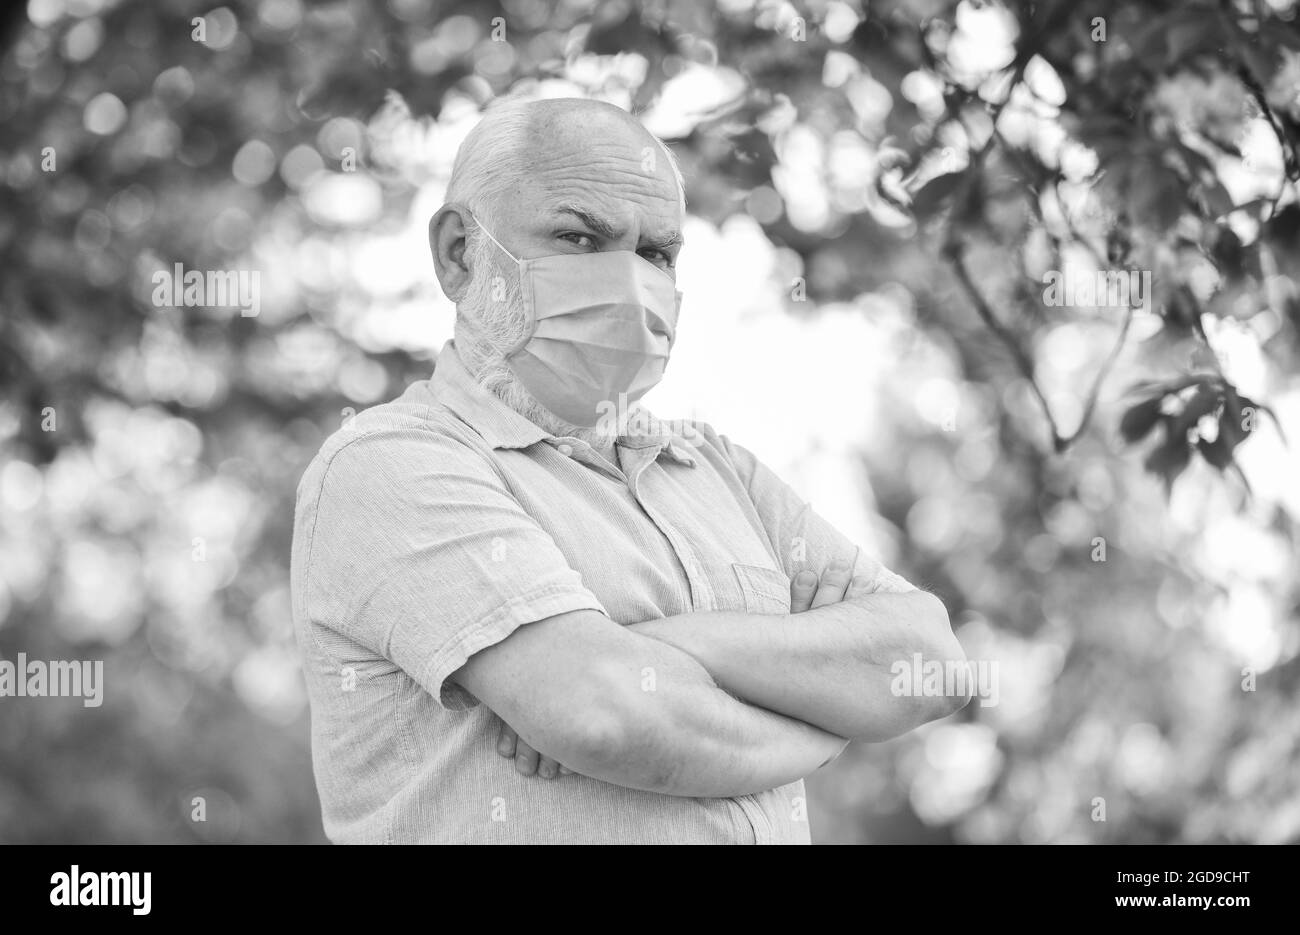 Elderly and other risk groups. Pandemic concept. Limit risk infection spreading. Black and white. Senior man wearing face mask. Older people at highes Stock Photo